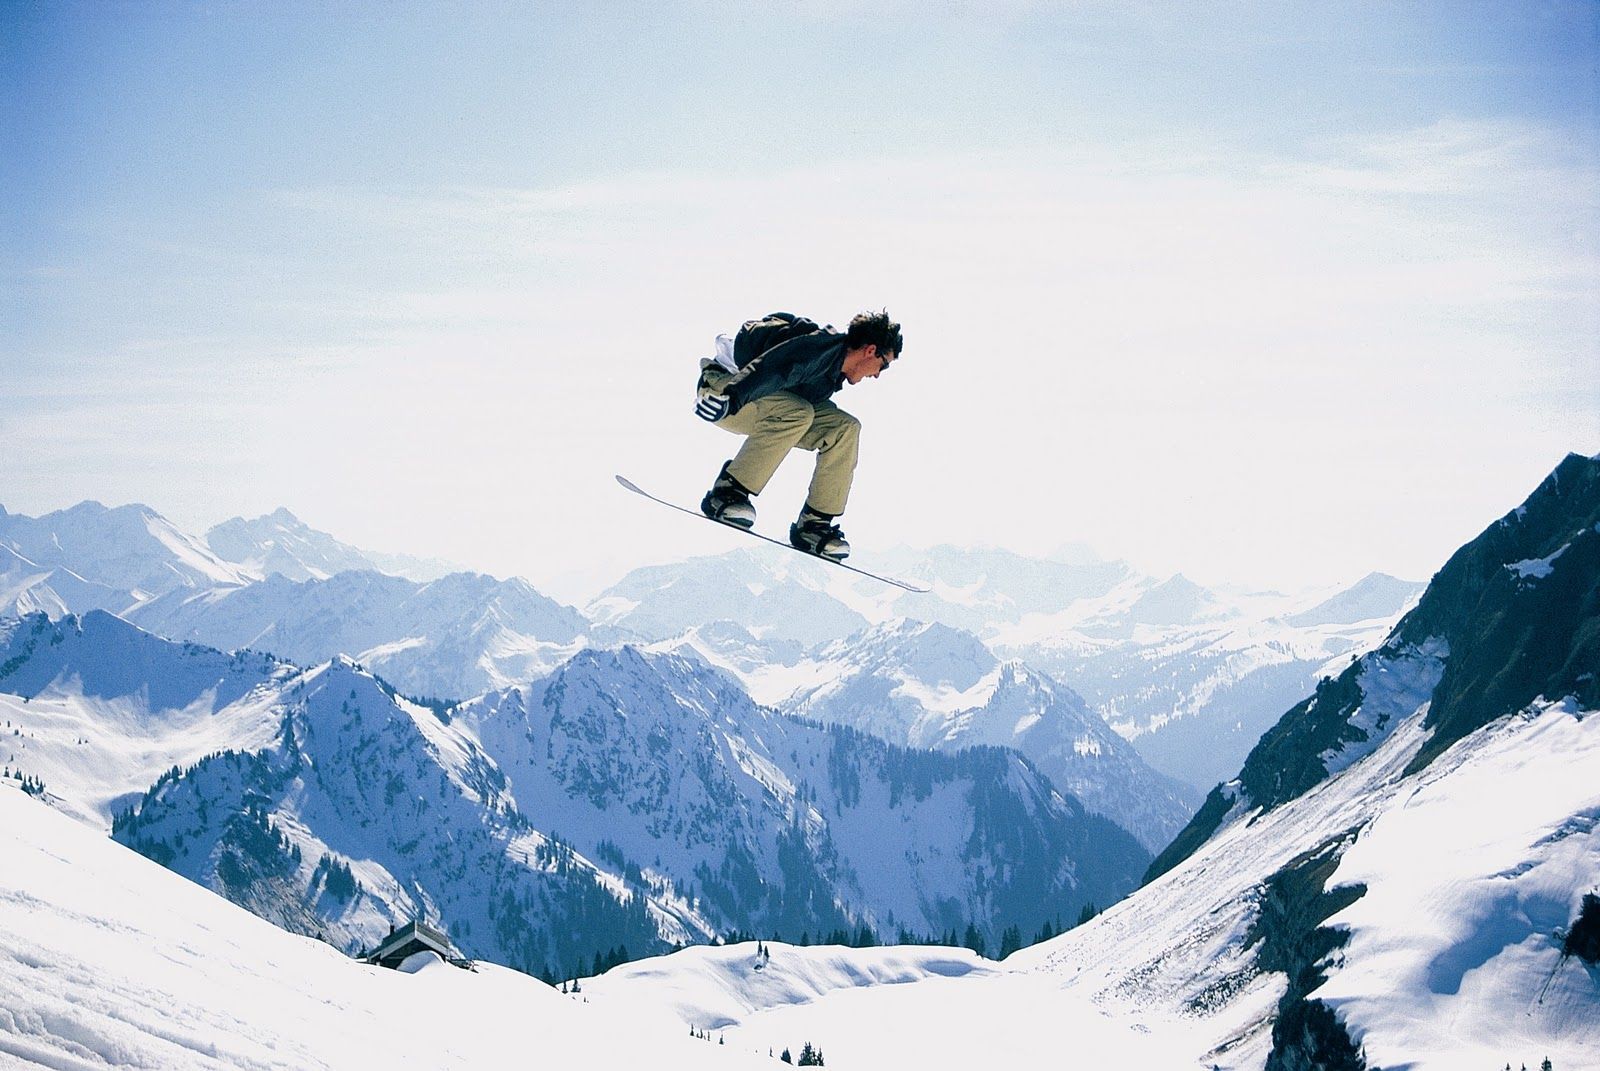 Top Nice Snowboarding Ands Wallpaper Images for Pinterest